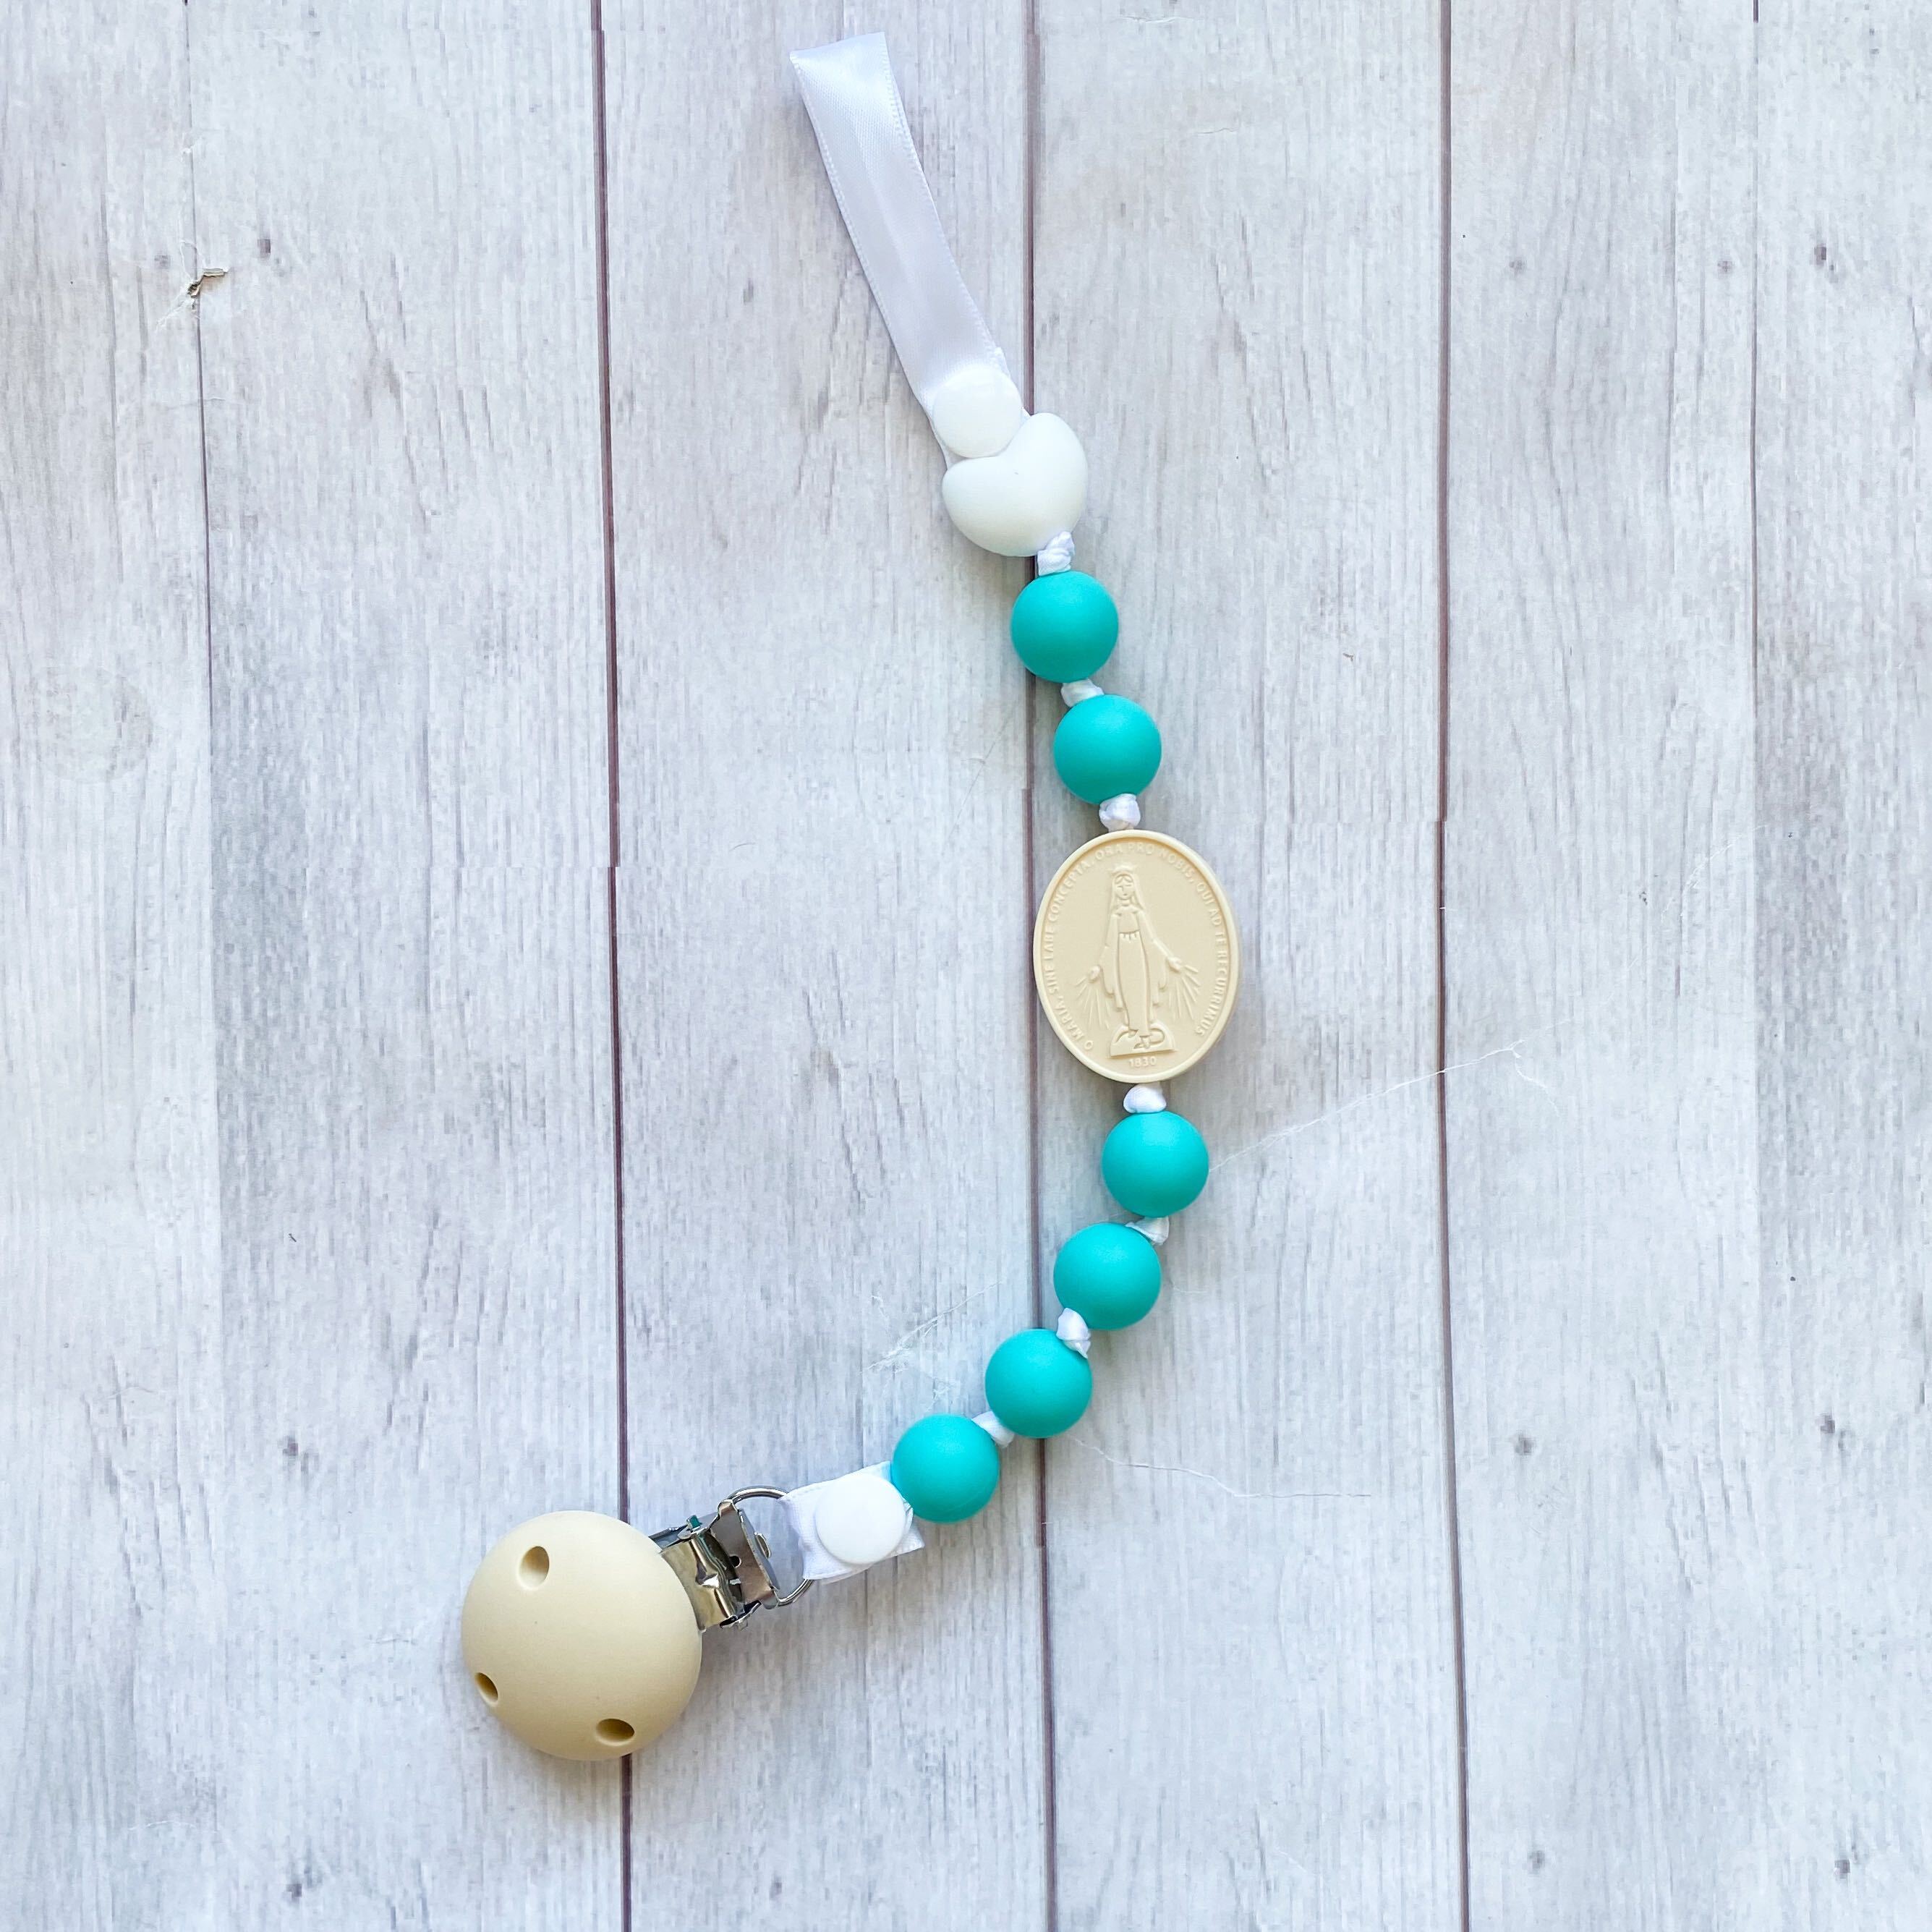 chews-life-silicone-pacifier-clip-turquoise-cream-miraculous-medal-31349541994672.jpg